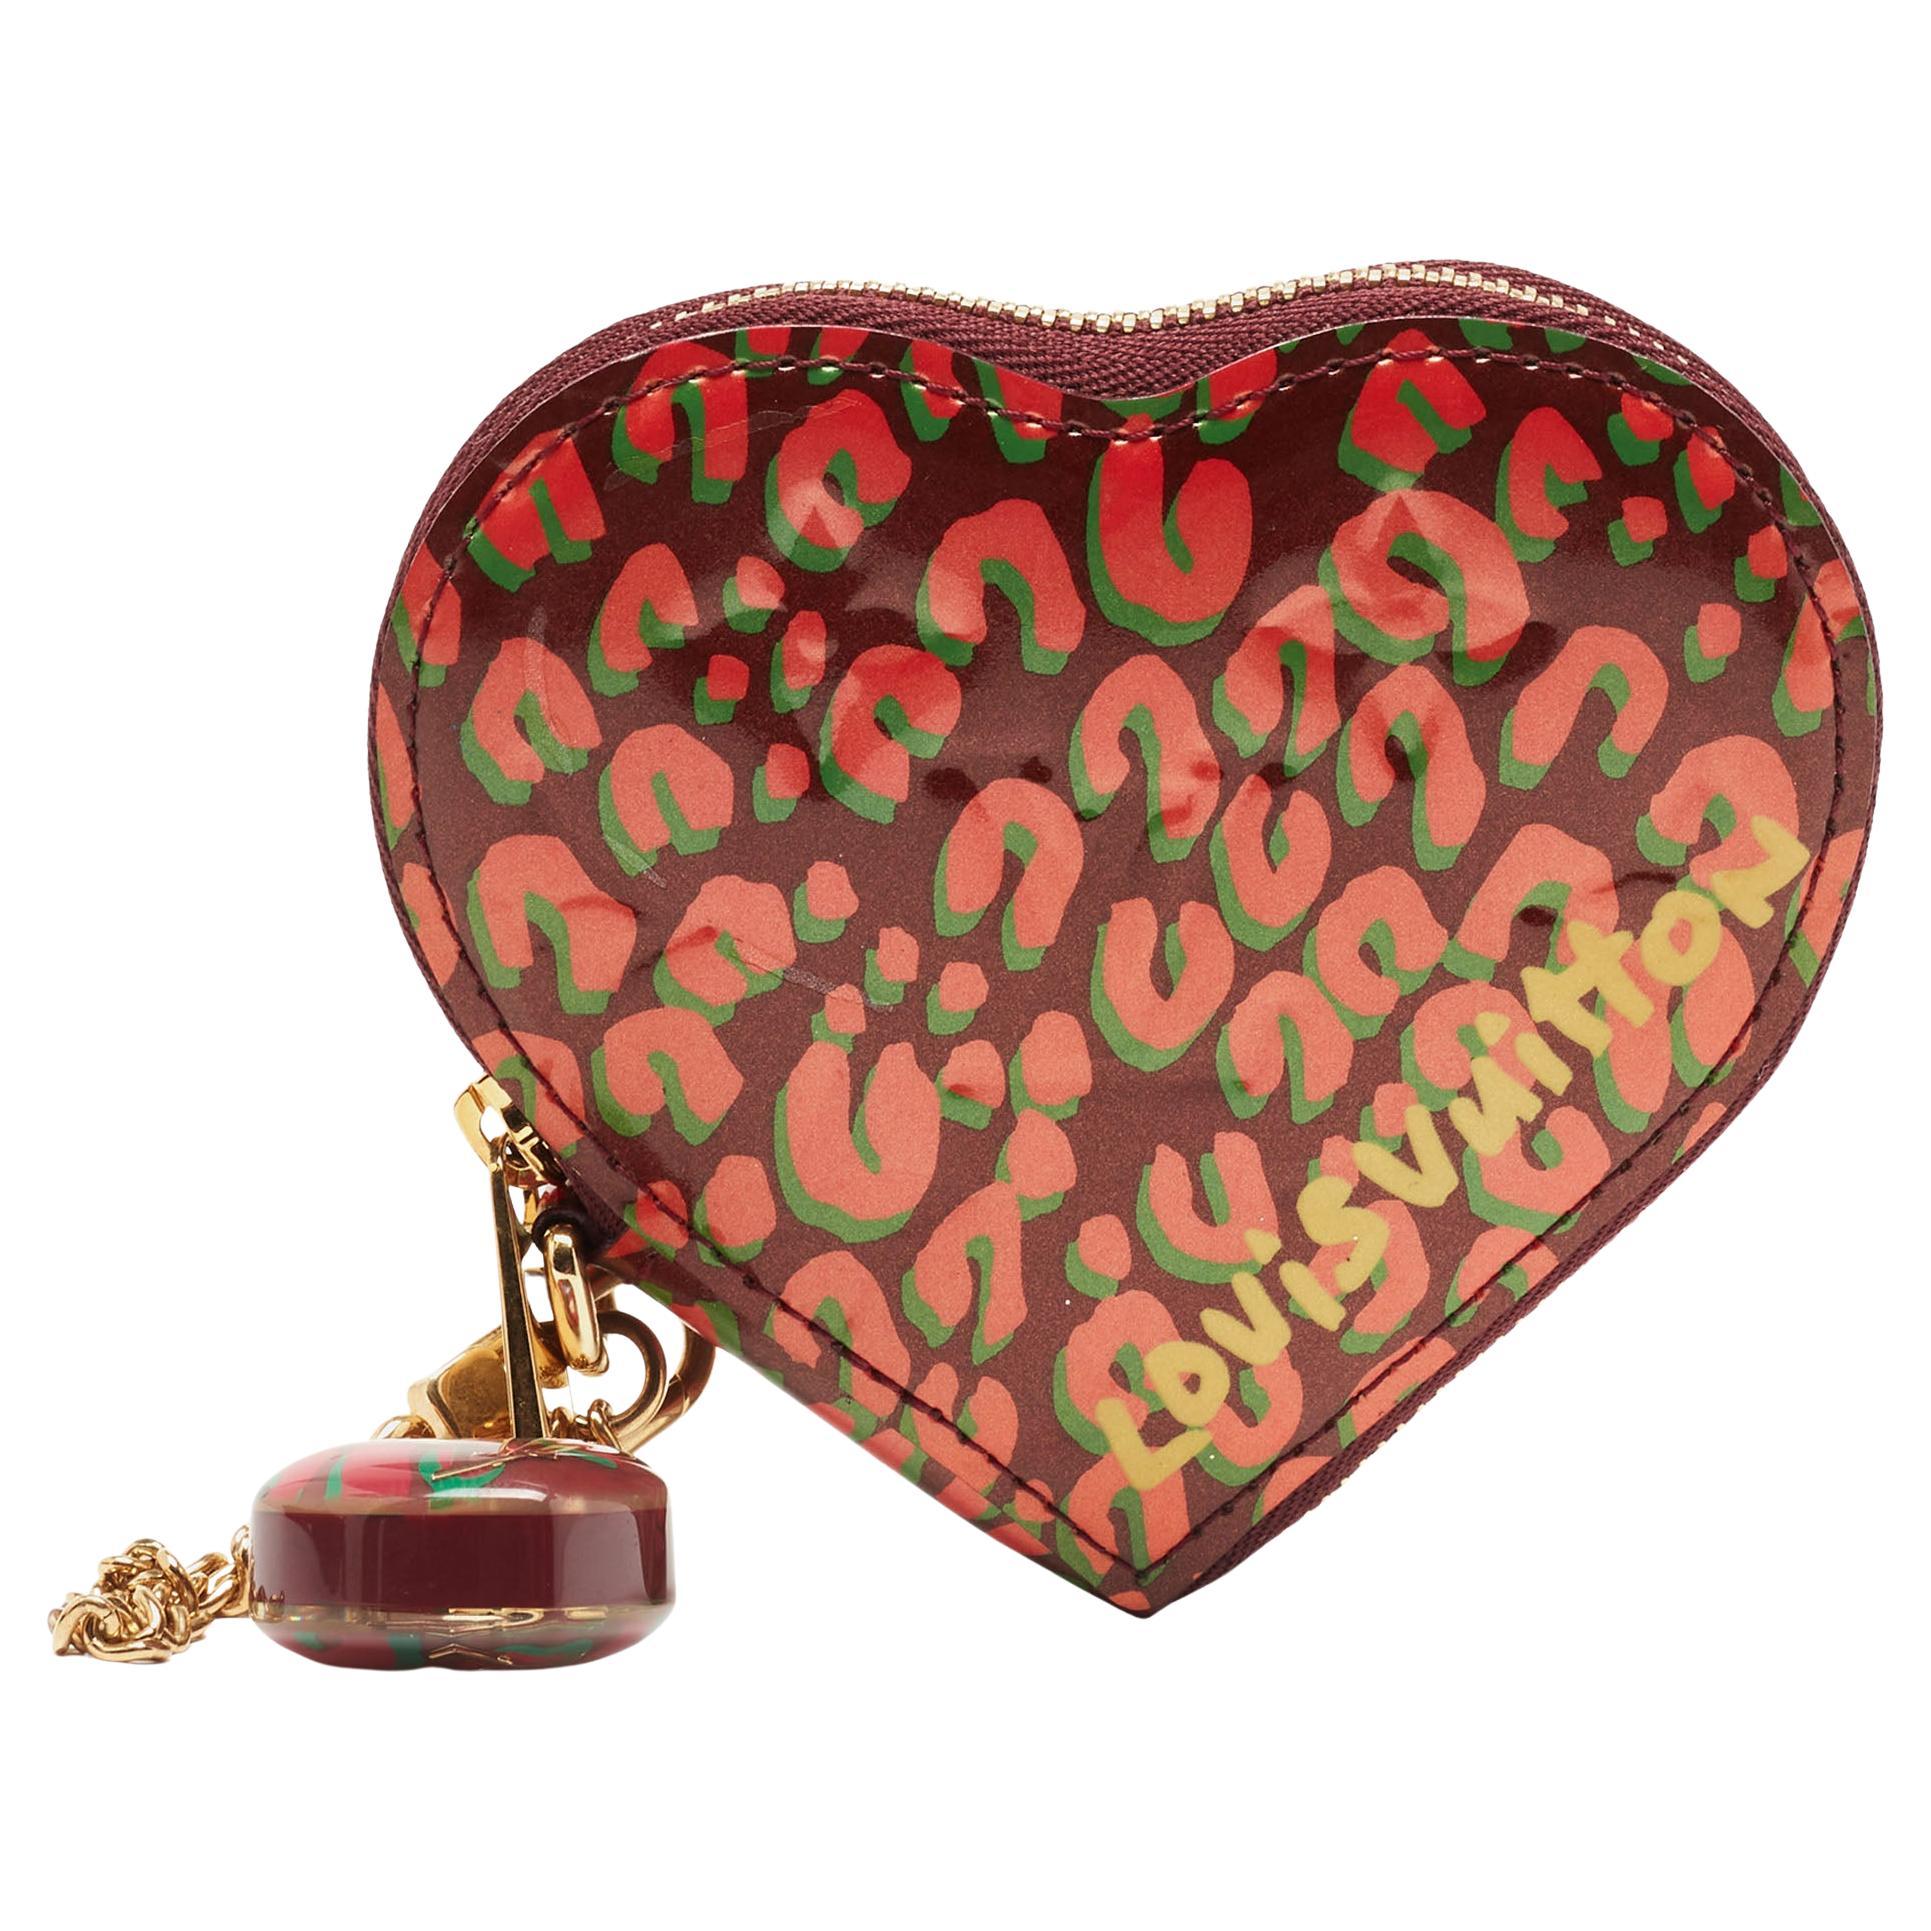 Louis Vuitton Vernis Leather Limited Edition Stephen Sprouse Heart Coin Purse